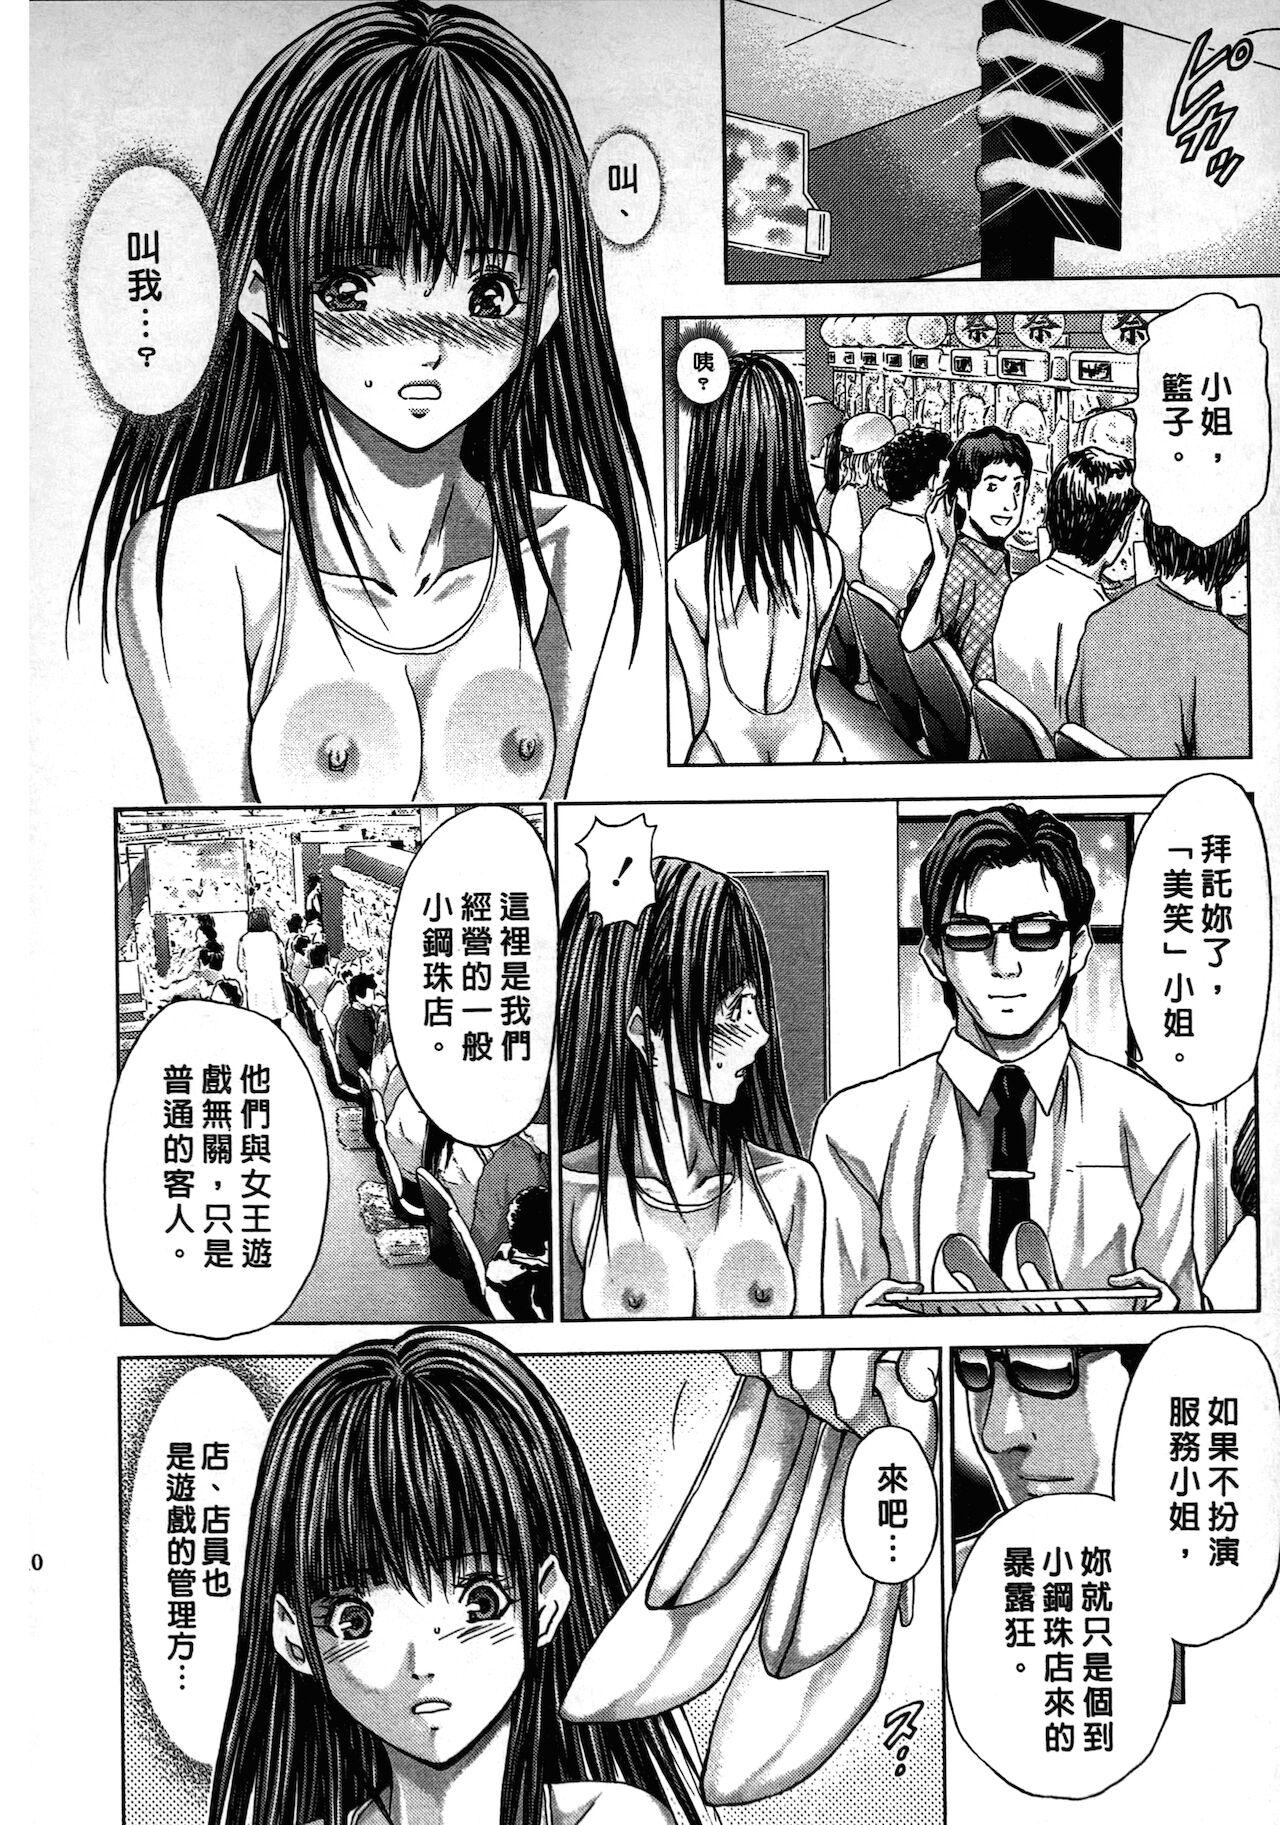 Mistress [Adachi Takumi] Queen's Game ~Haitoku no Mysterious Game~ 2 | 女王遊戲 ~背德的詭譎遊戲~ 2 [Chinese] Tiny Tits Porn - Page 10